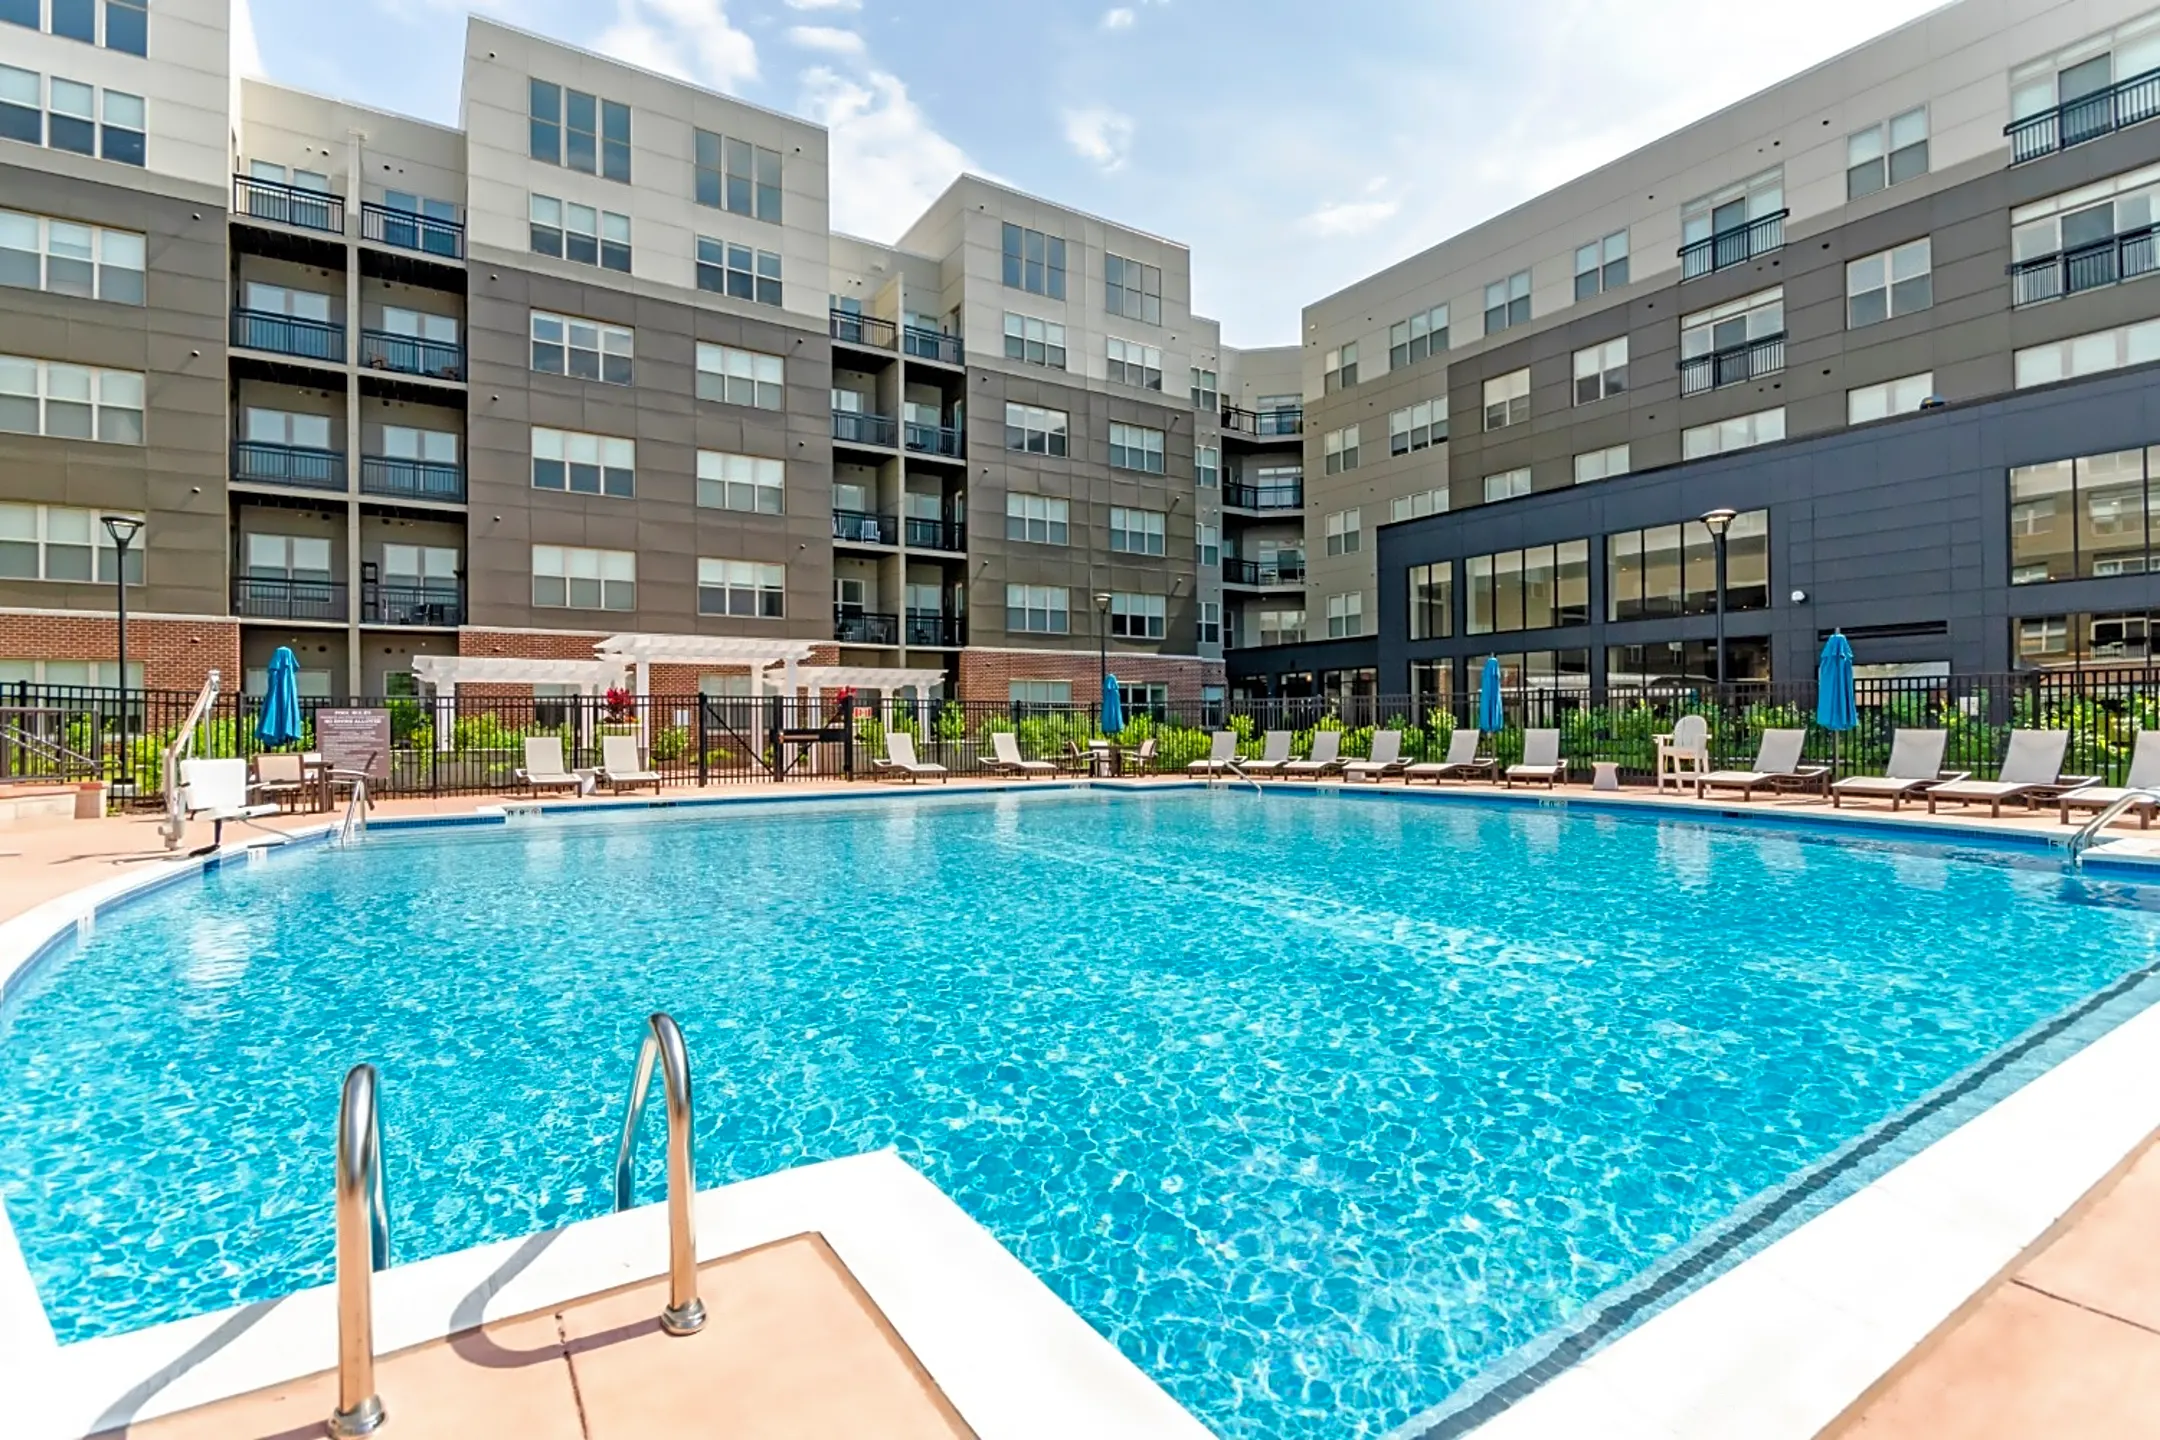 Pool - The Residences at Annapolis Junction - Annapolis Junction, MD